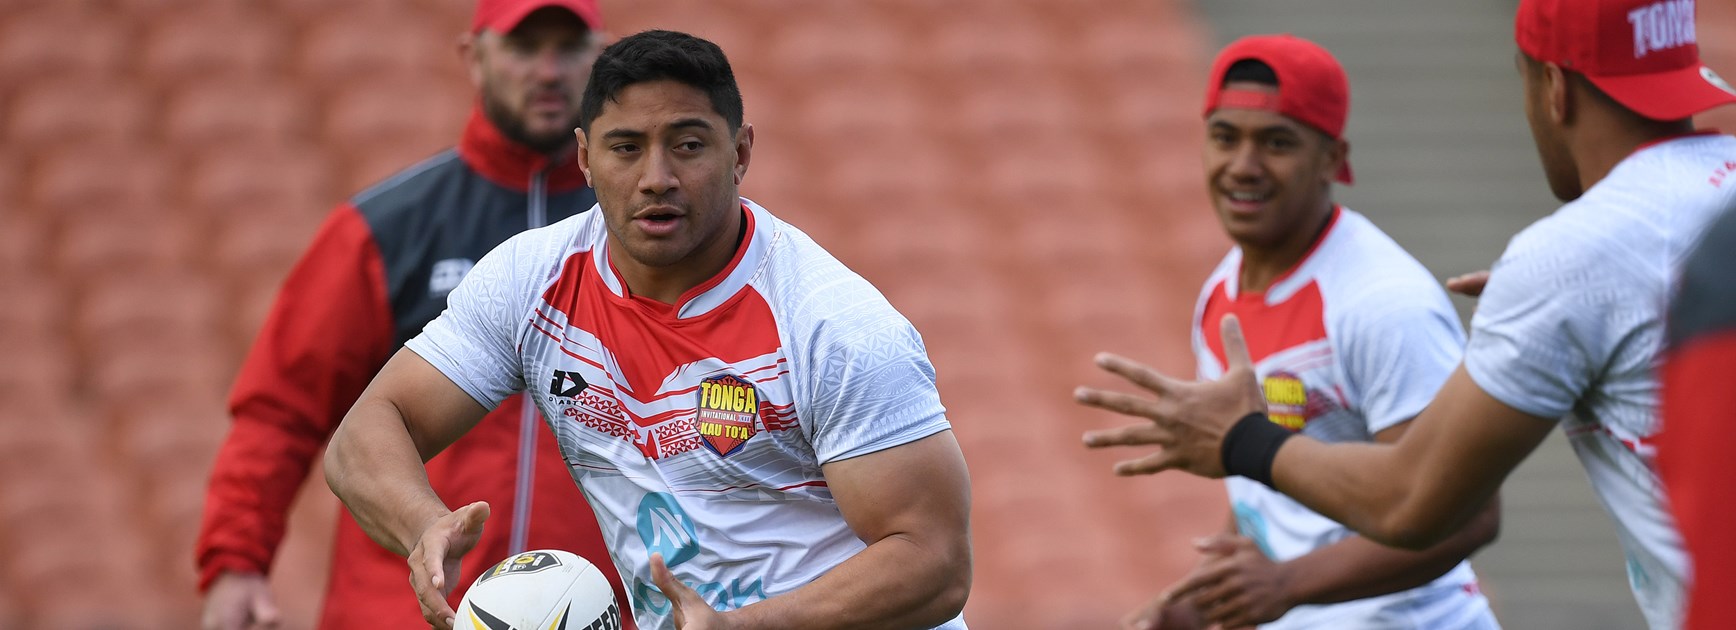 Woolf hungry for Tonga to prove they belong in main pack